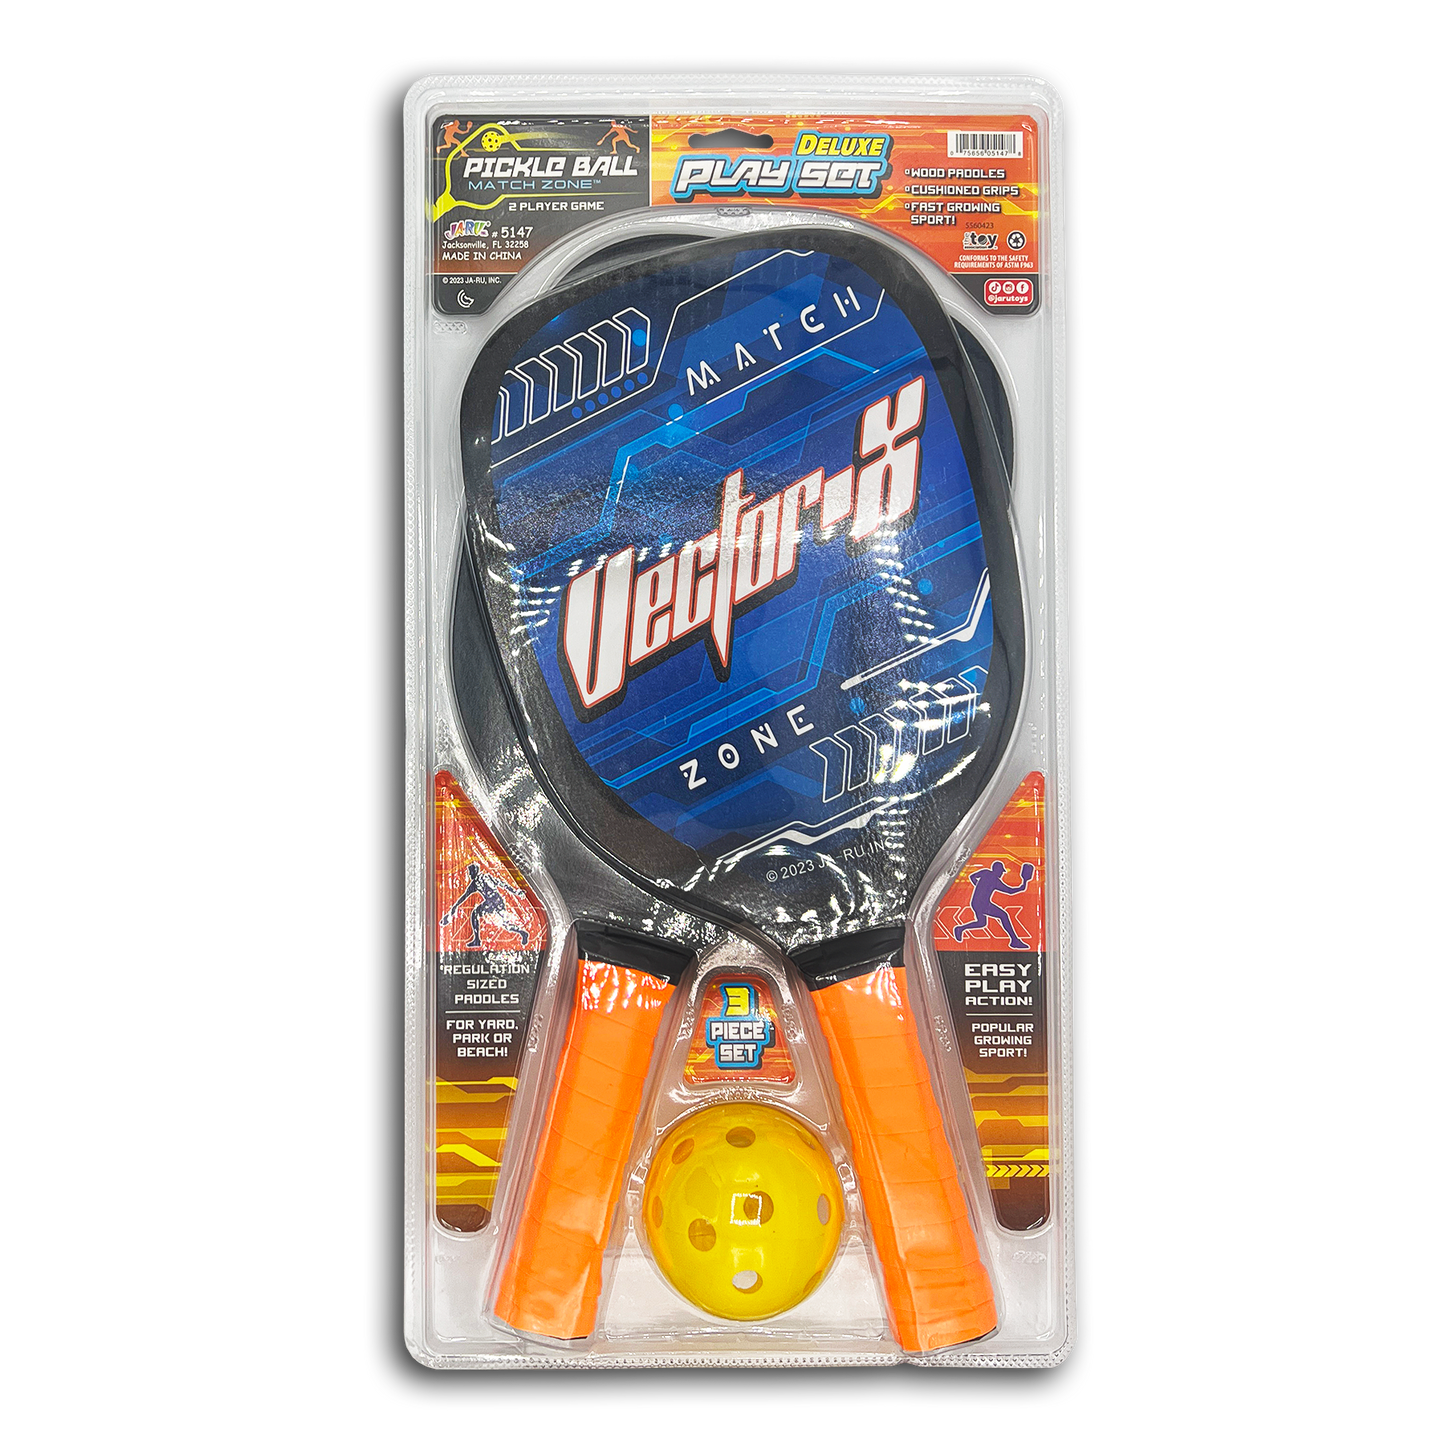 DELUXE PICKLE BALL SET